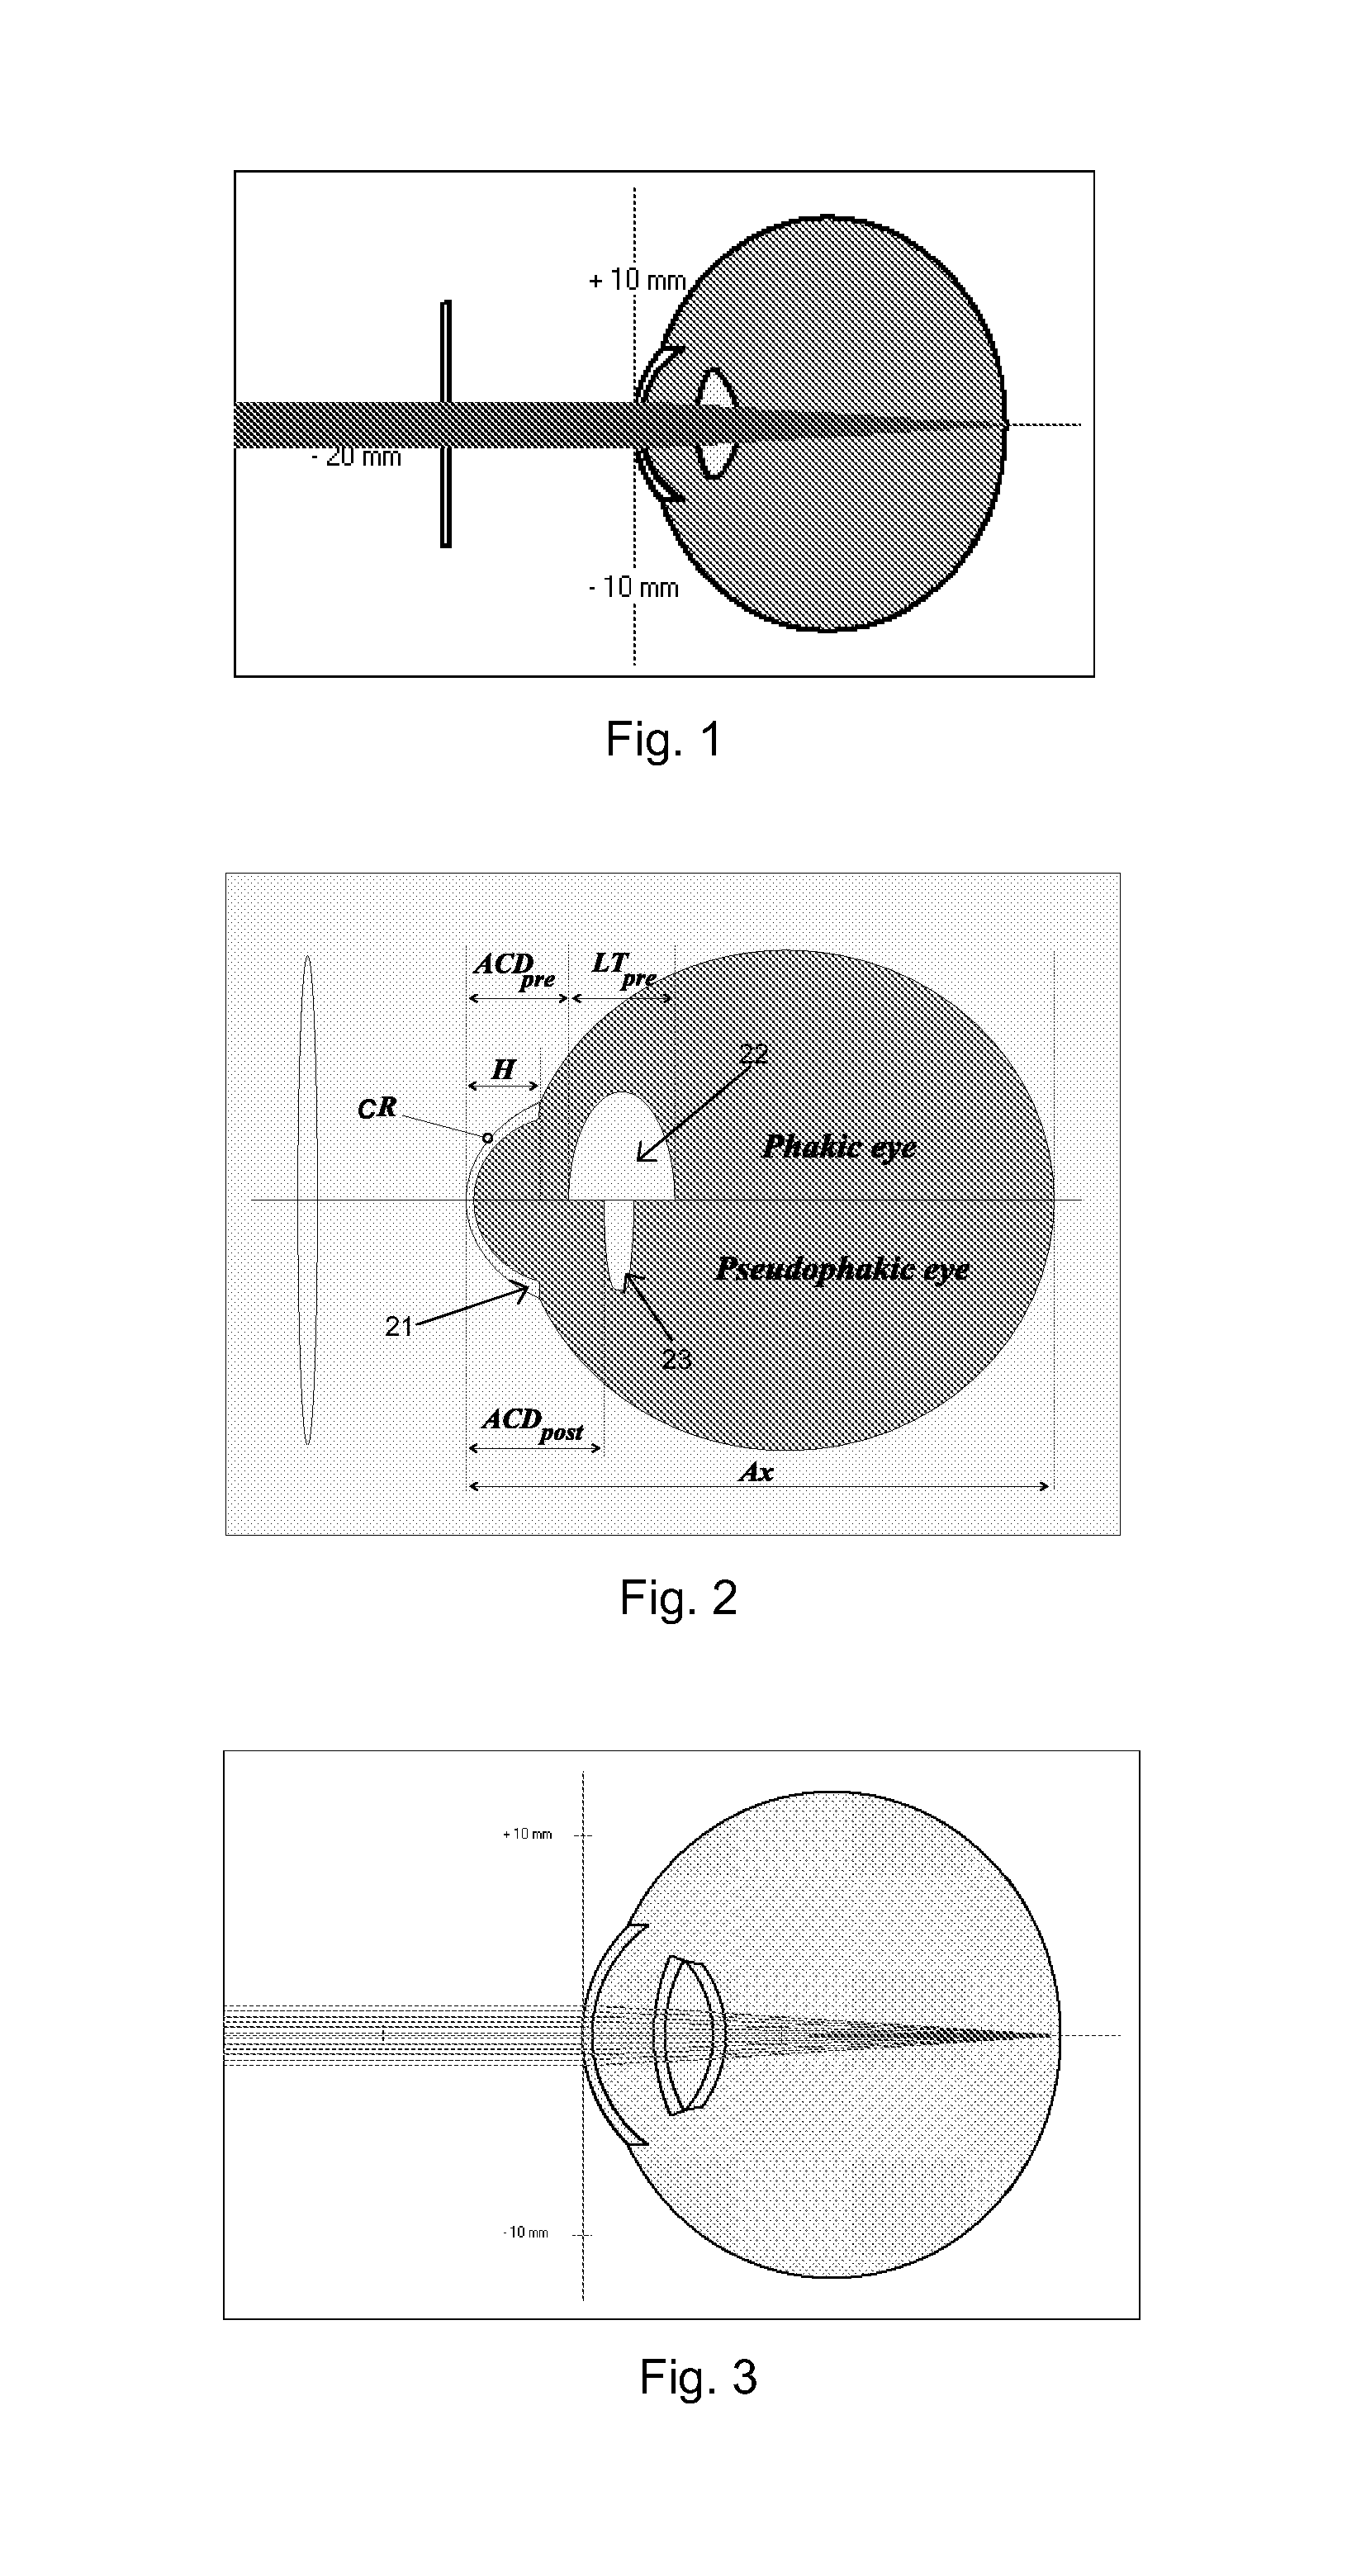 System and Method for Determining and Predicting IOL Power in Situ